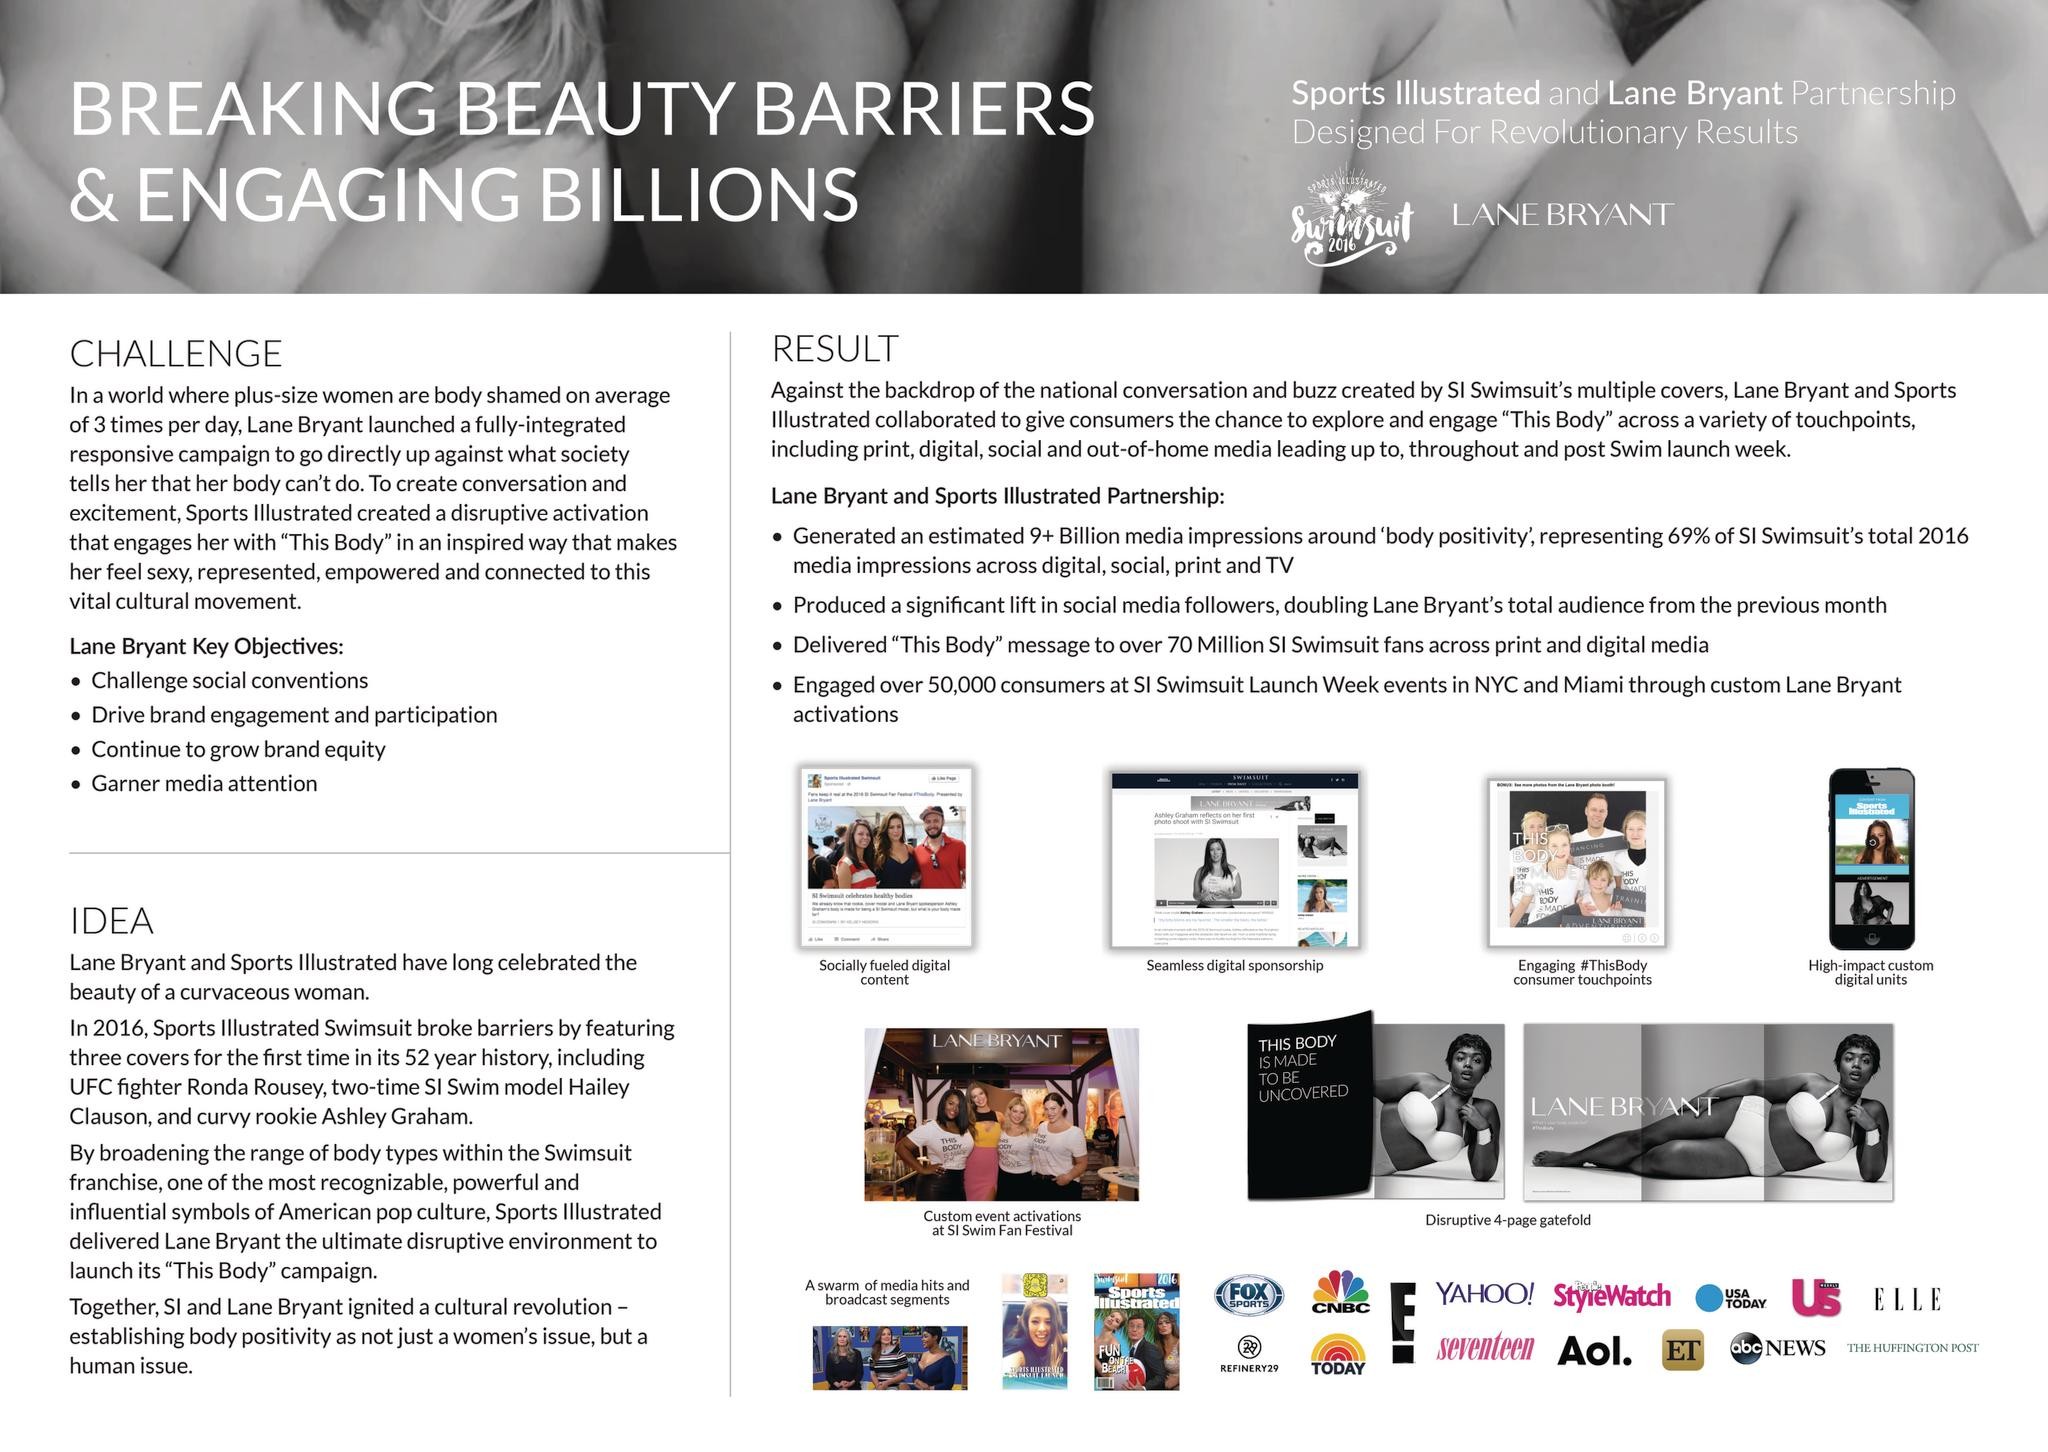 SPORTS ILLUSTRATED AND LANE BRYANT: BREAKING BEAUTY BARRIERS & ENGAGING BILLIONS